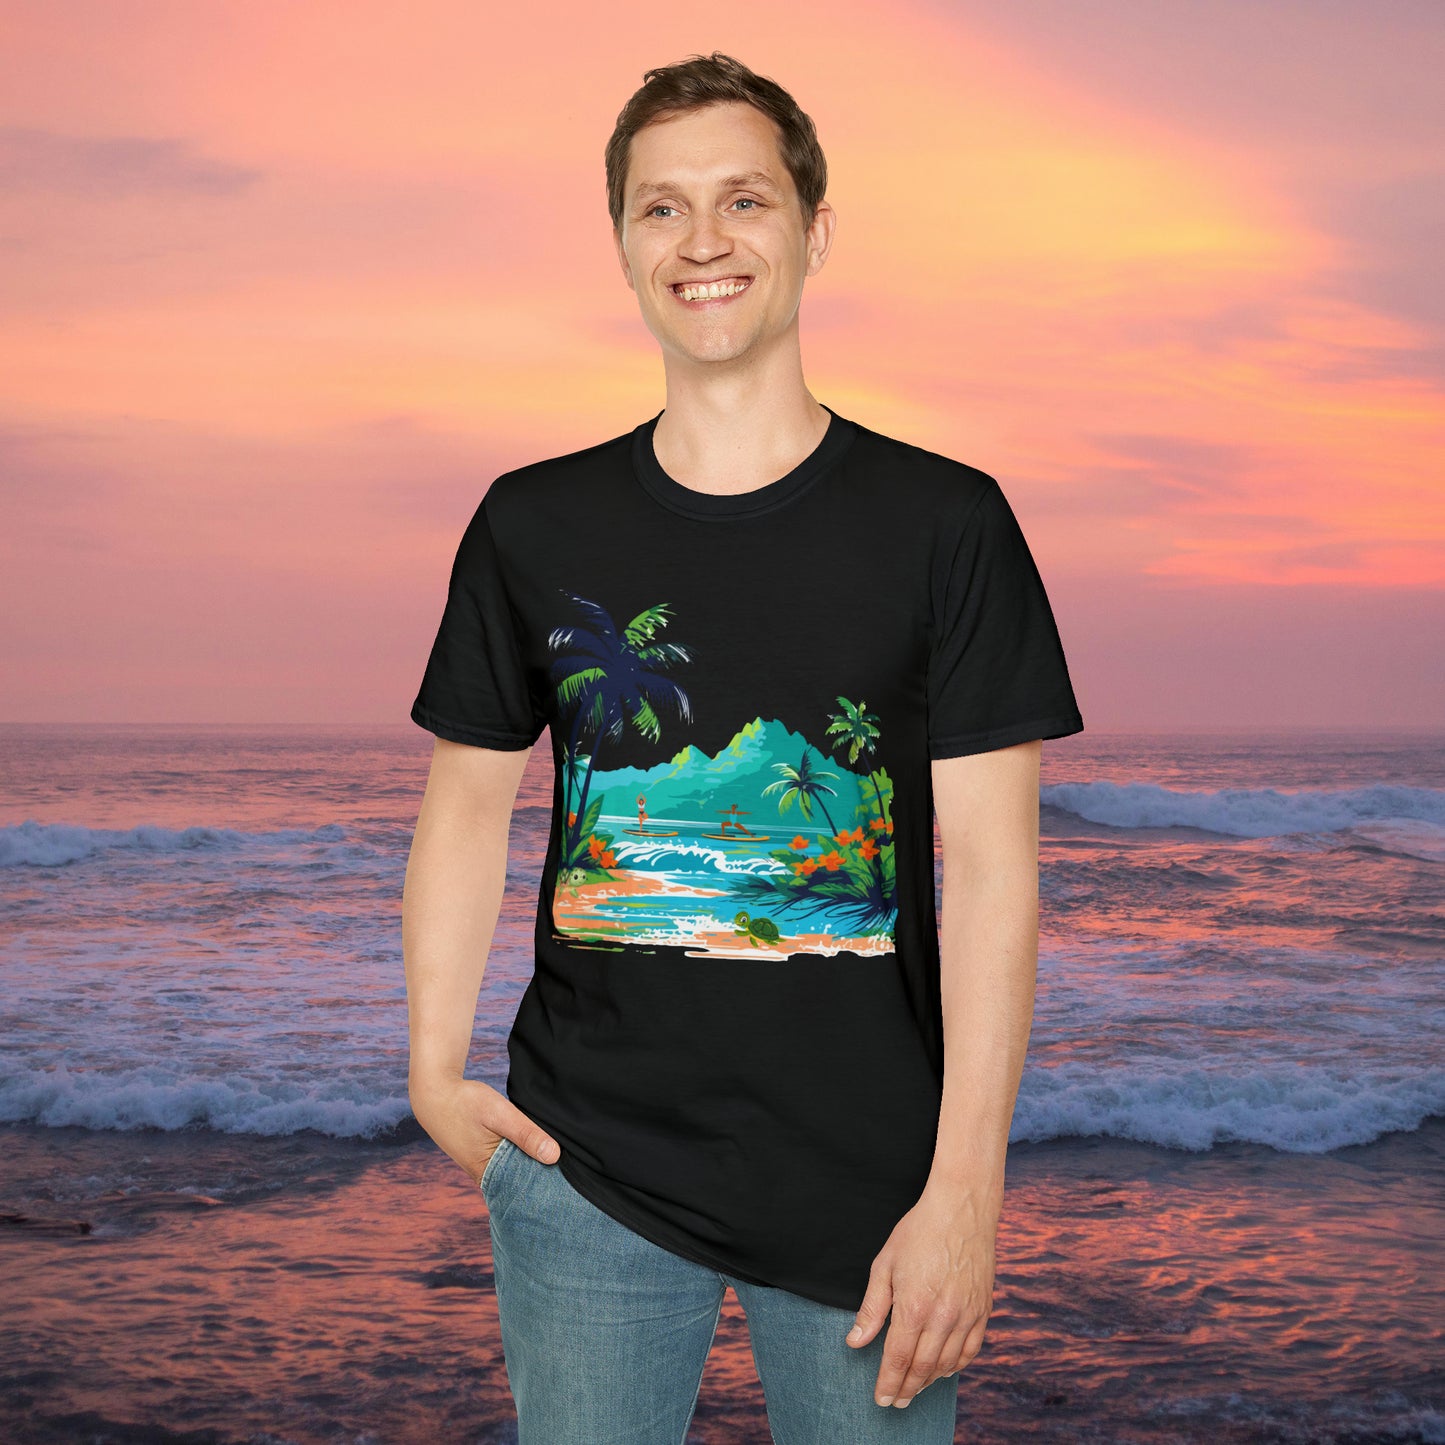 A peaceful paddle board yoga, anyone? With turtles, palm trees and yes the ocean and mountains. Enjoy! A Unisex Softstyle T-Shirt.